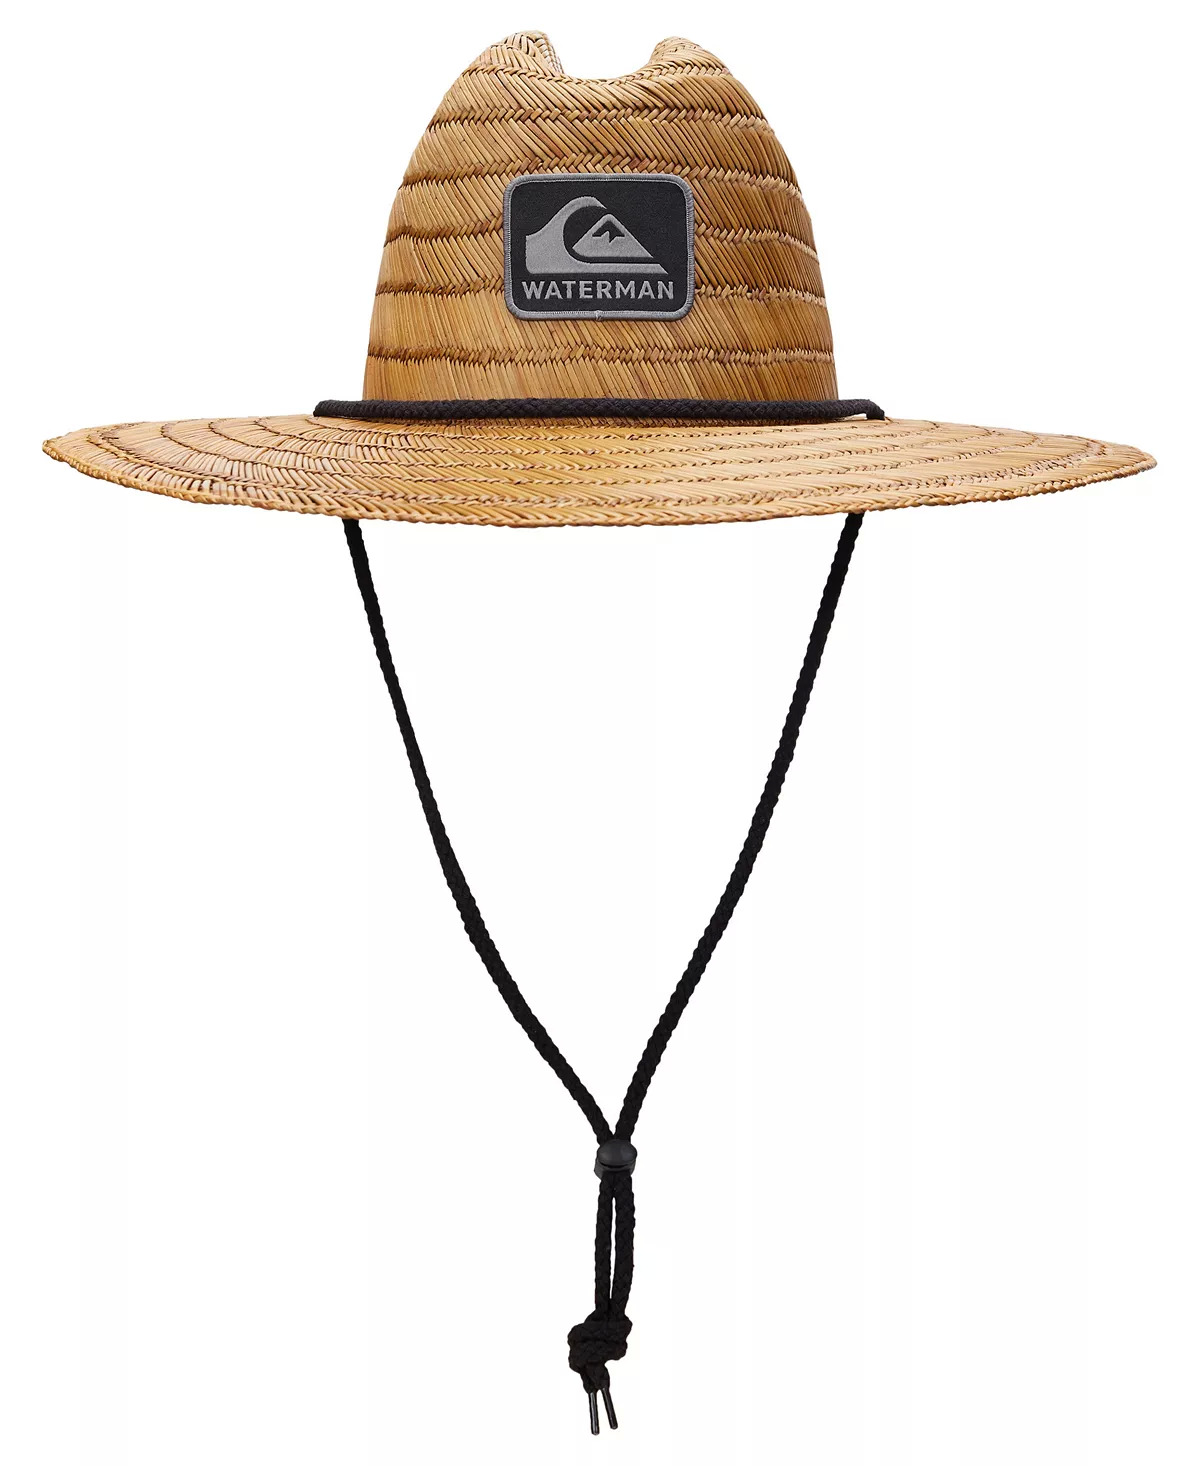 Quiksilver Men's Waterman The Tier Straw Sun Hat $11, Quiksilver Men's Hi Water On The Brain Trucker Cap $9.03 & More + Free Store Pickup at Macy's or FS on $25+